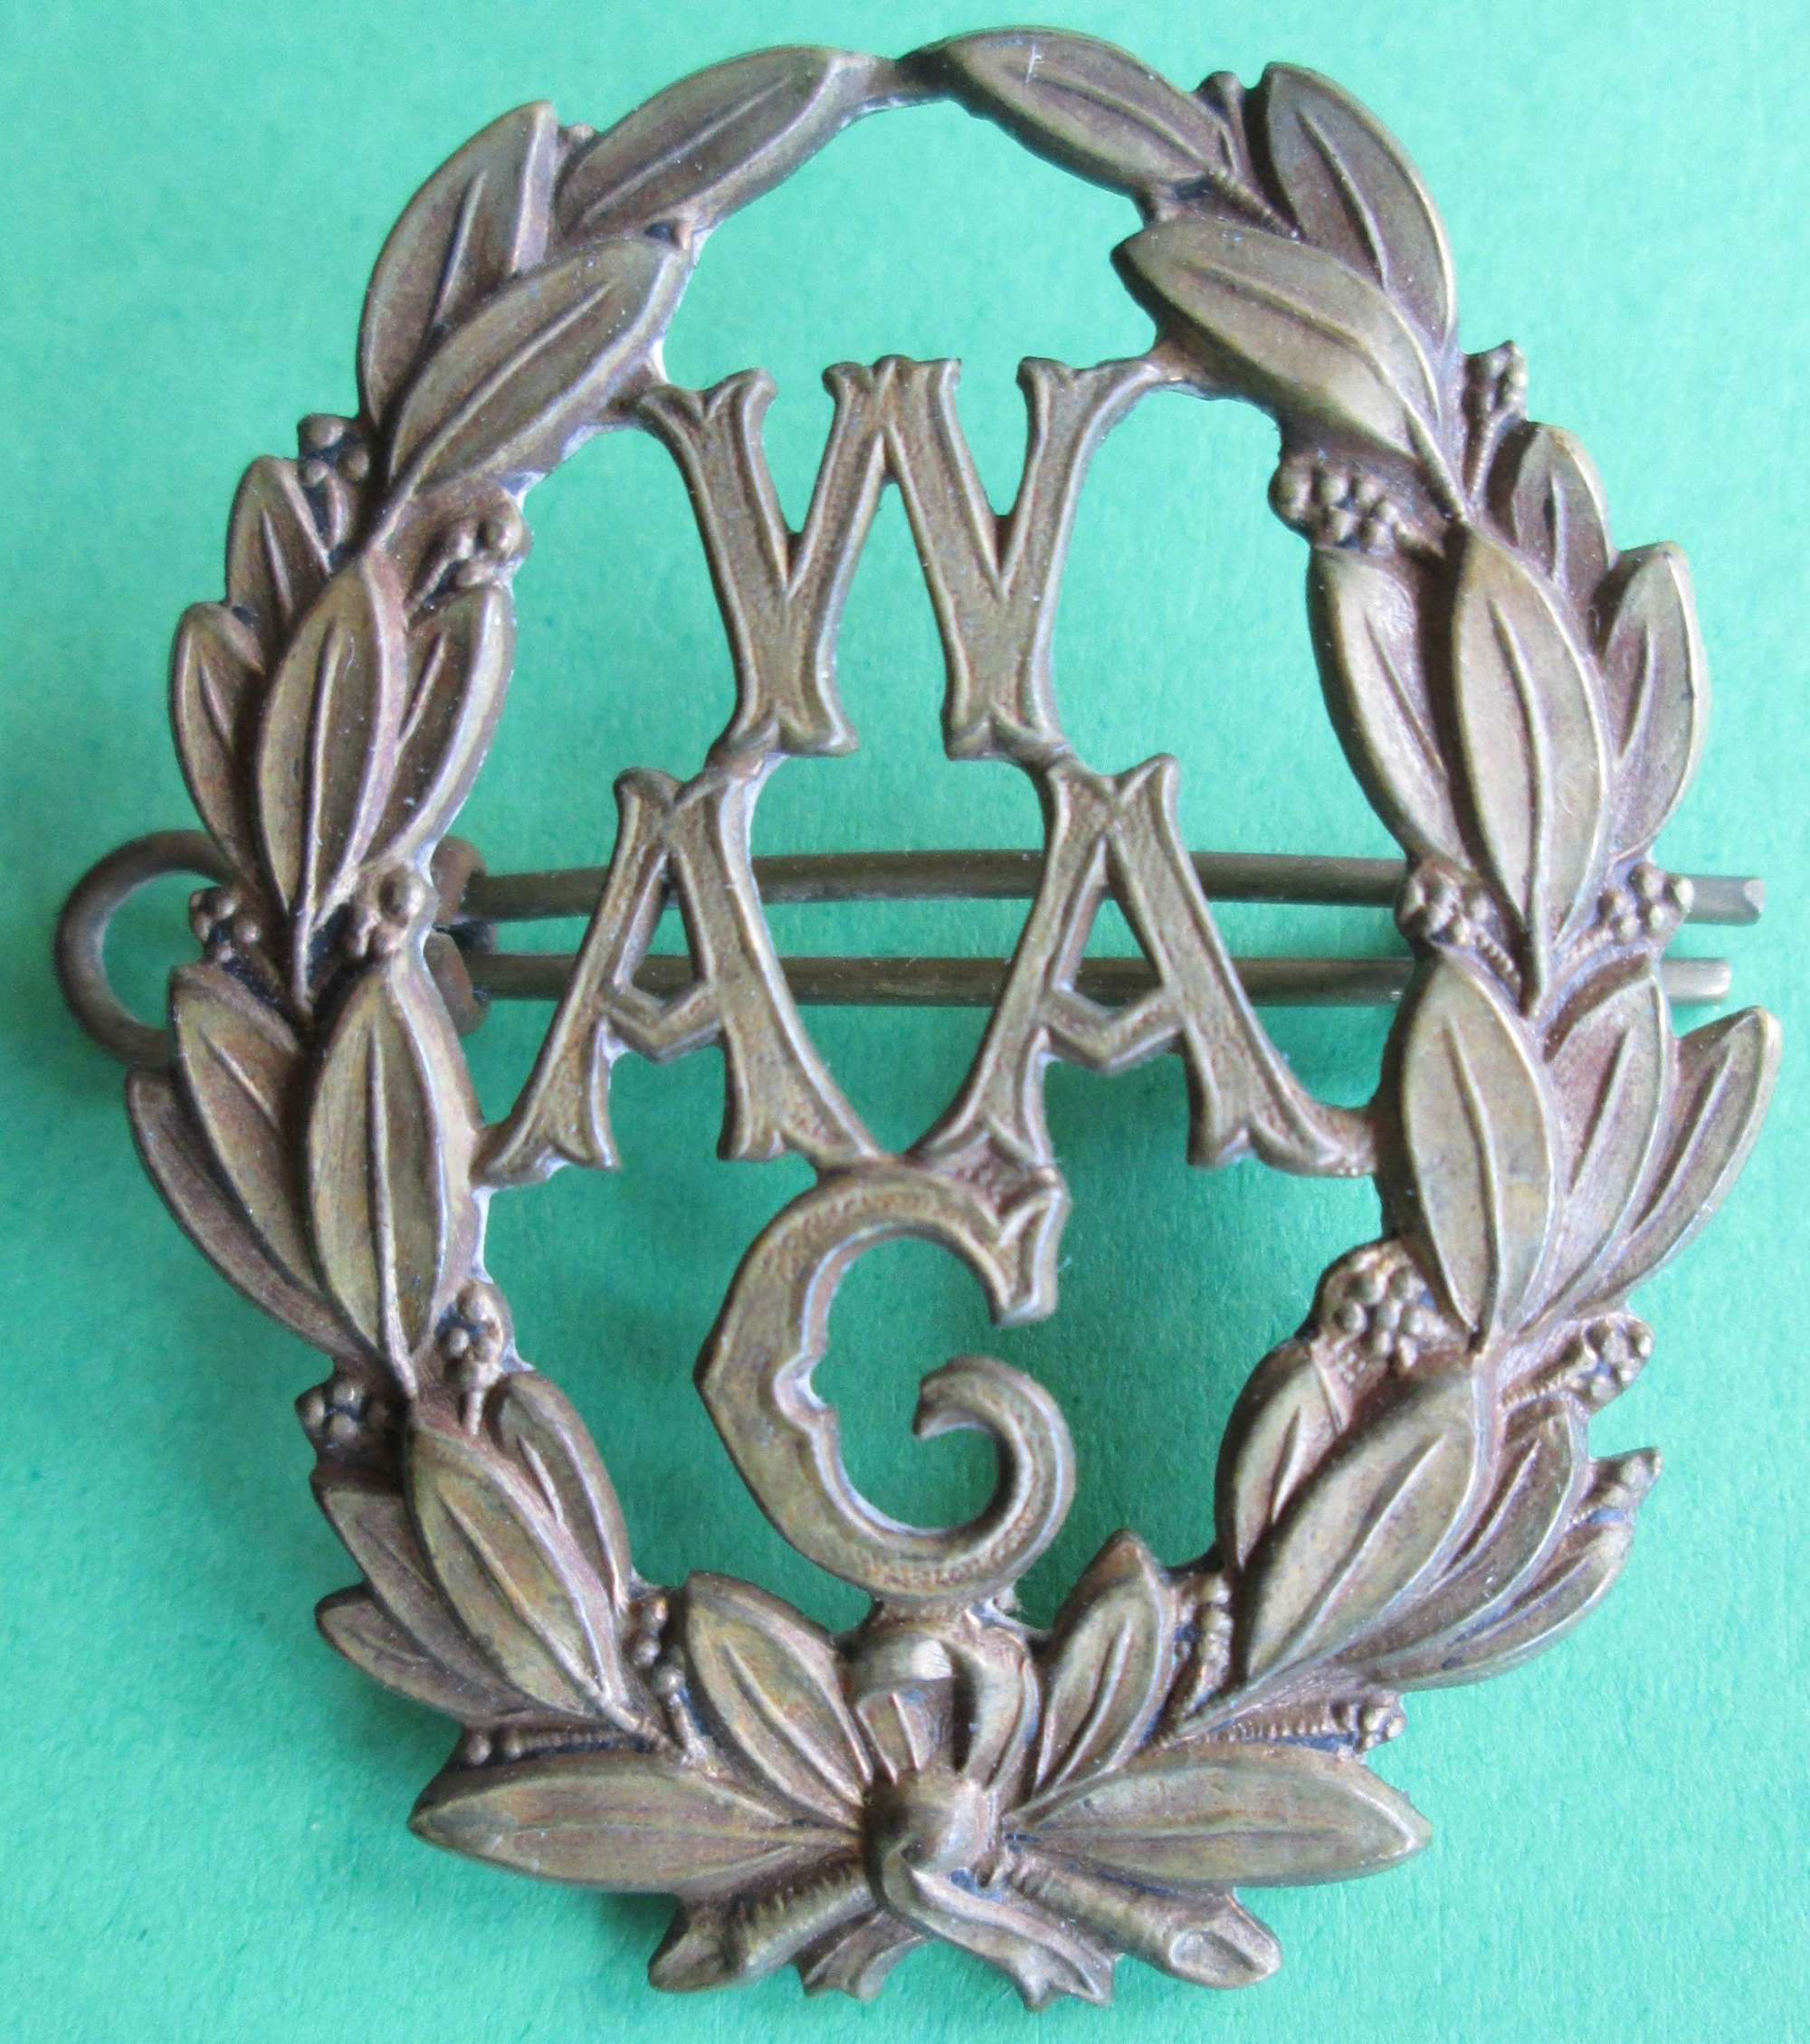 A FIRST WORLD WAR WOMEN'S ARMY AUXILIARY CORPS BADGE